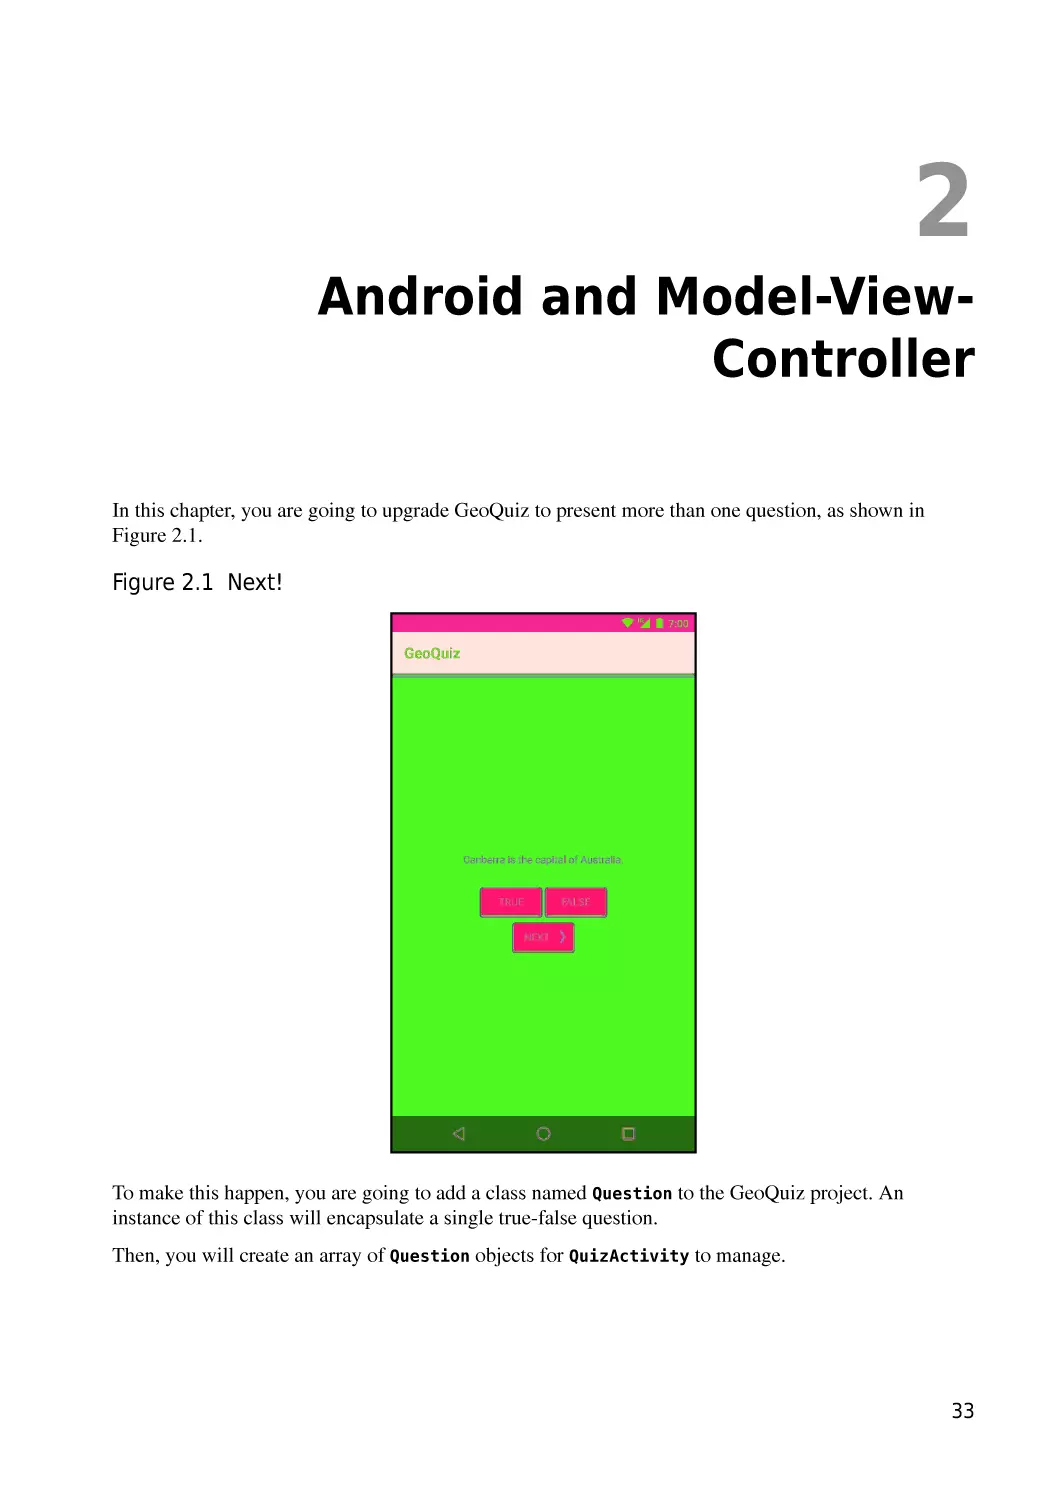 Chapter 2  Android and Model-View-Controller